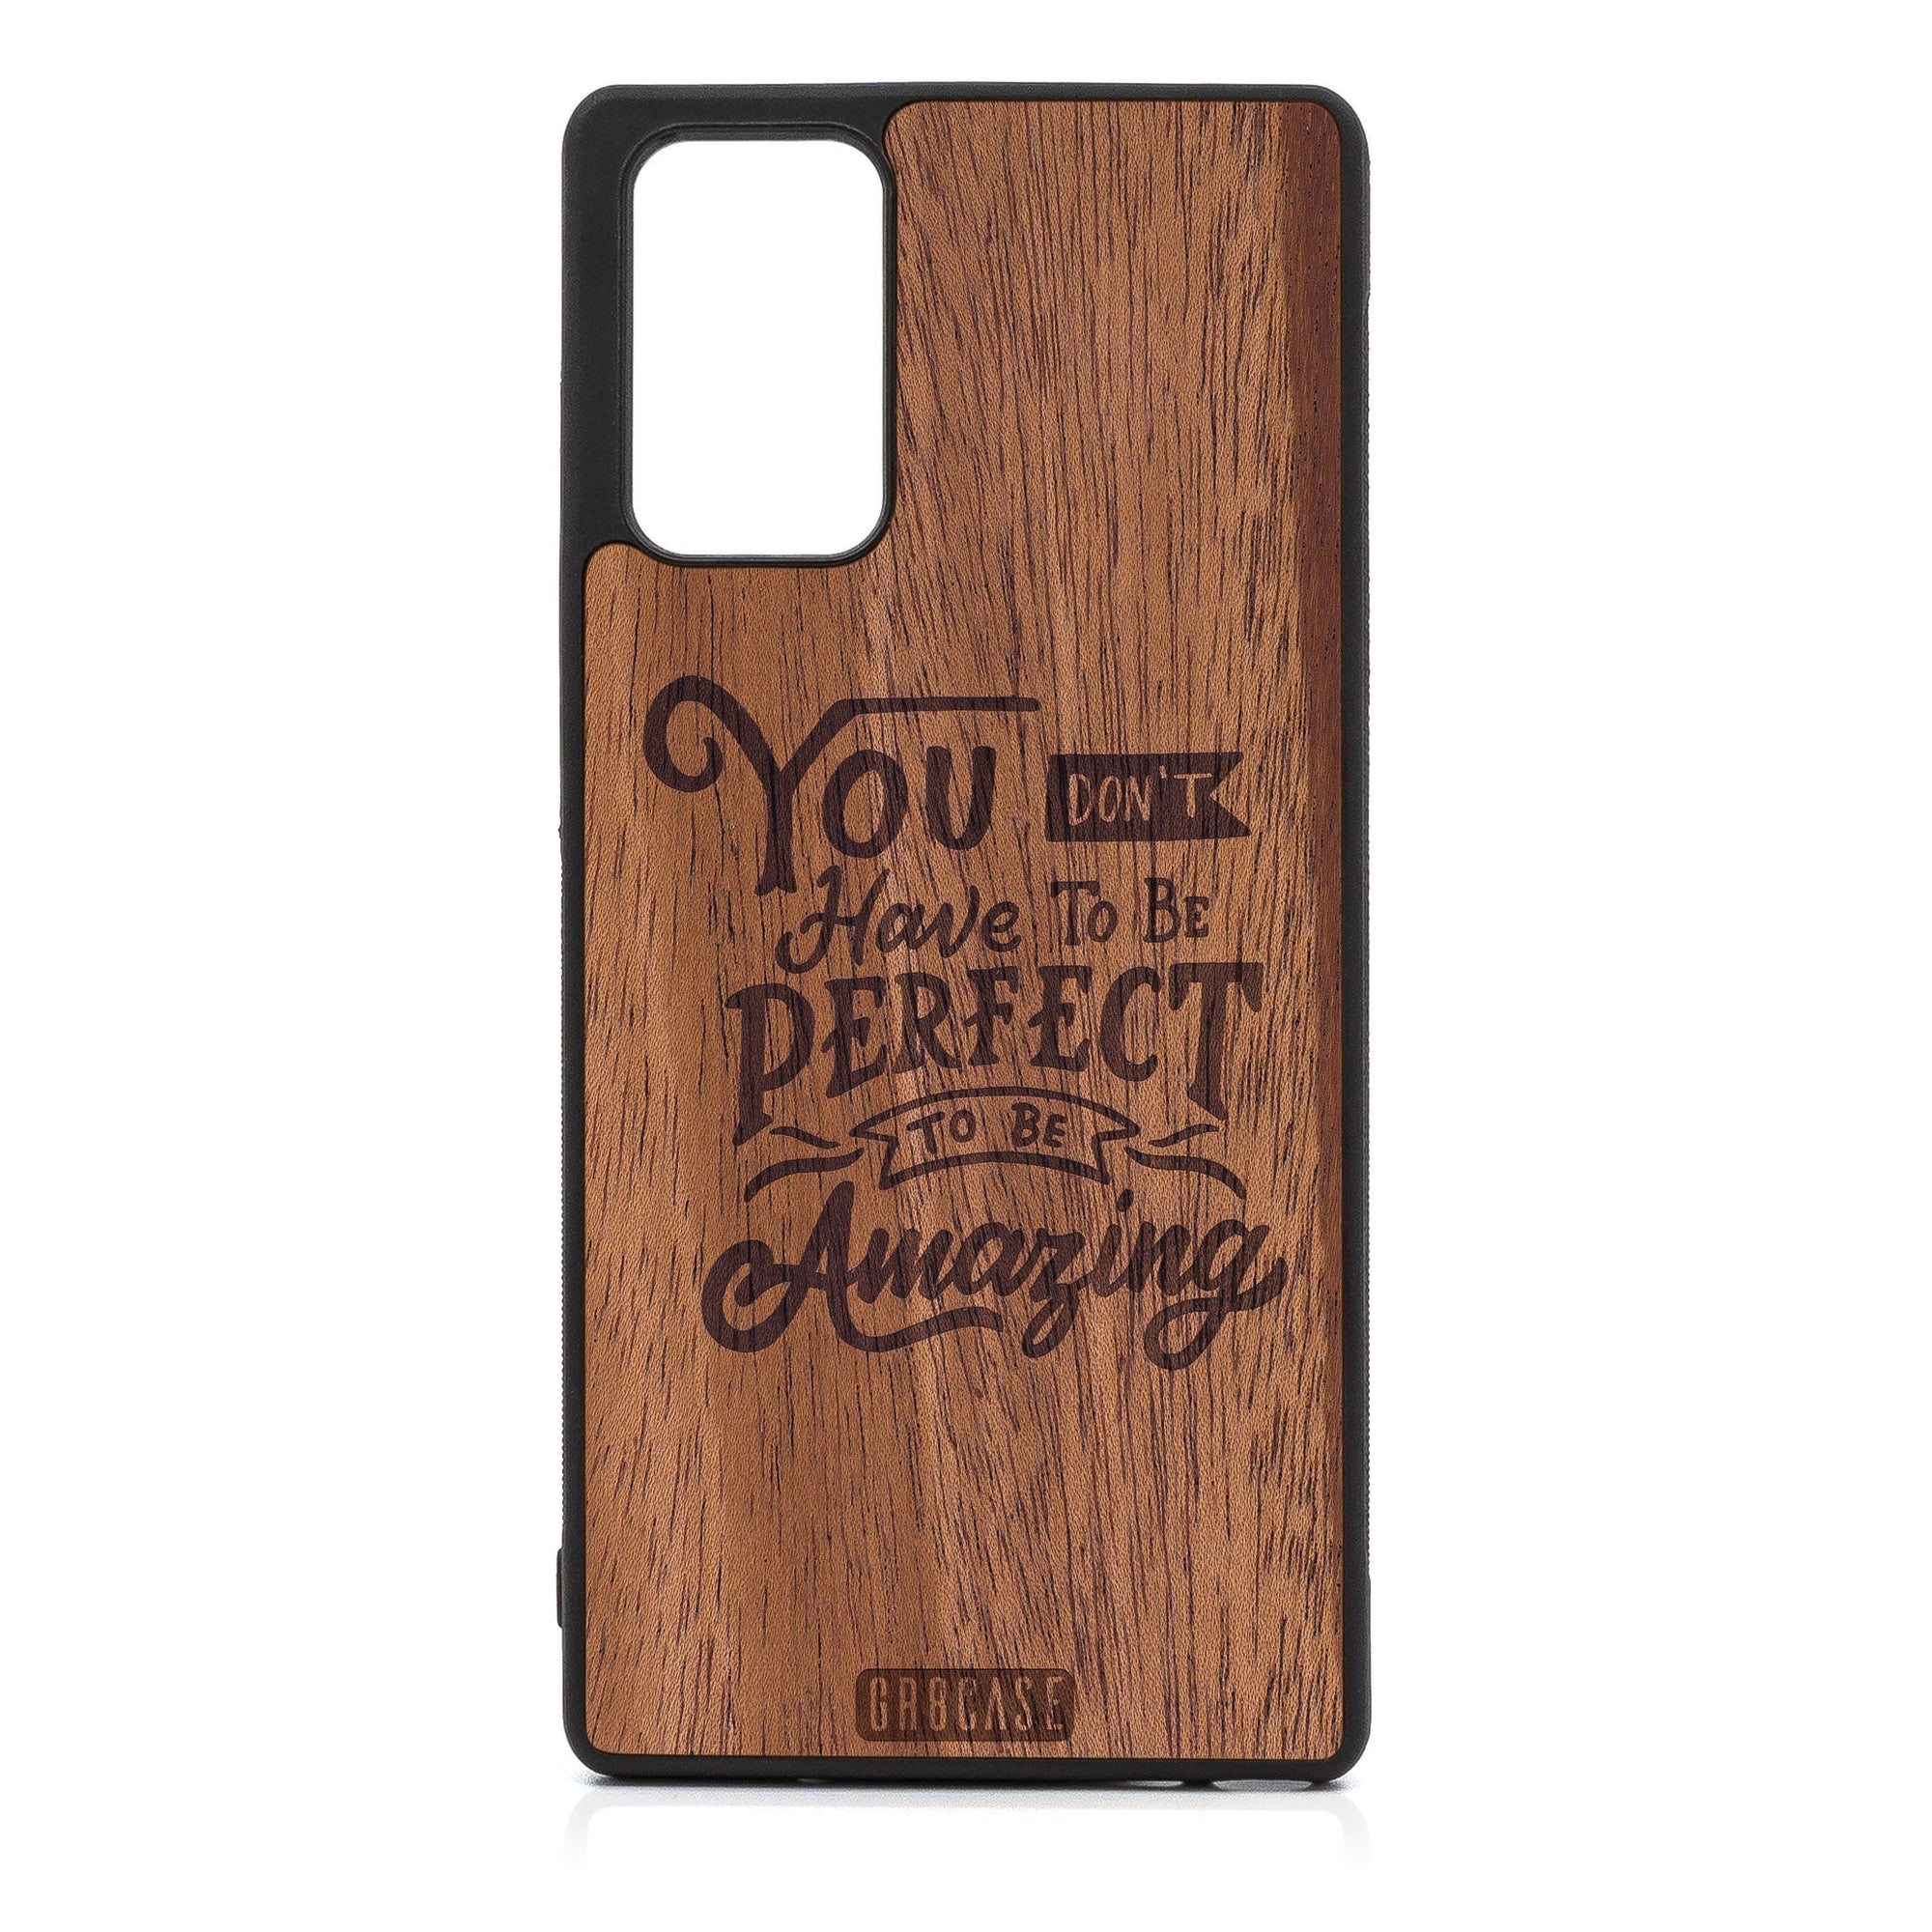 You Don’t Have To Be Perfect To Be Amazing Design Wood Case For Samsung Galaxy A71 5G